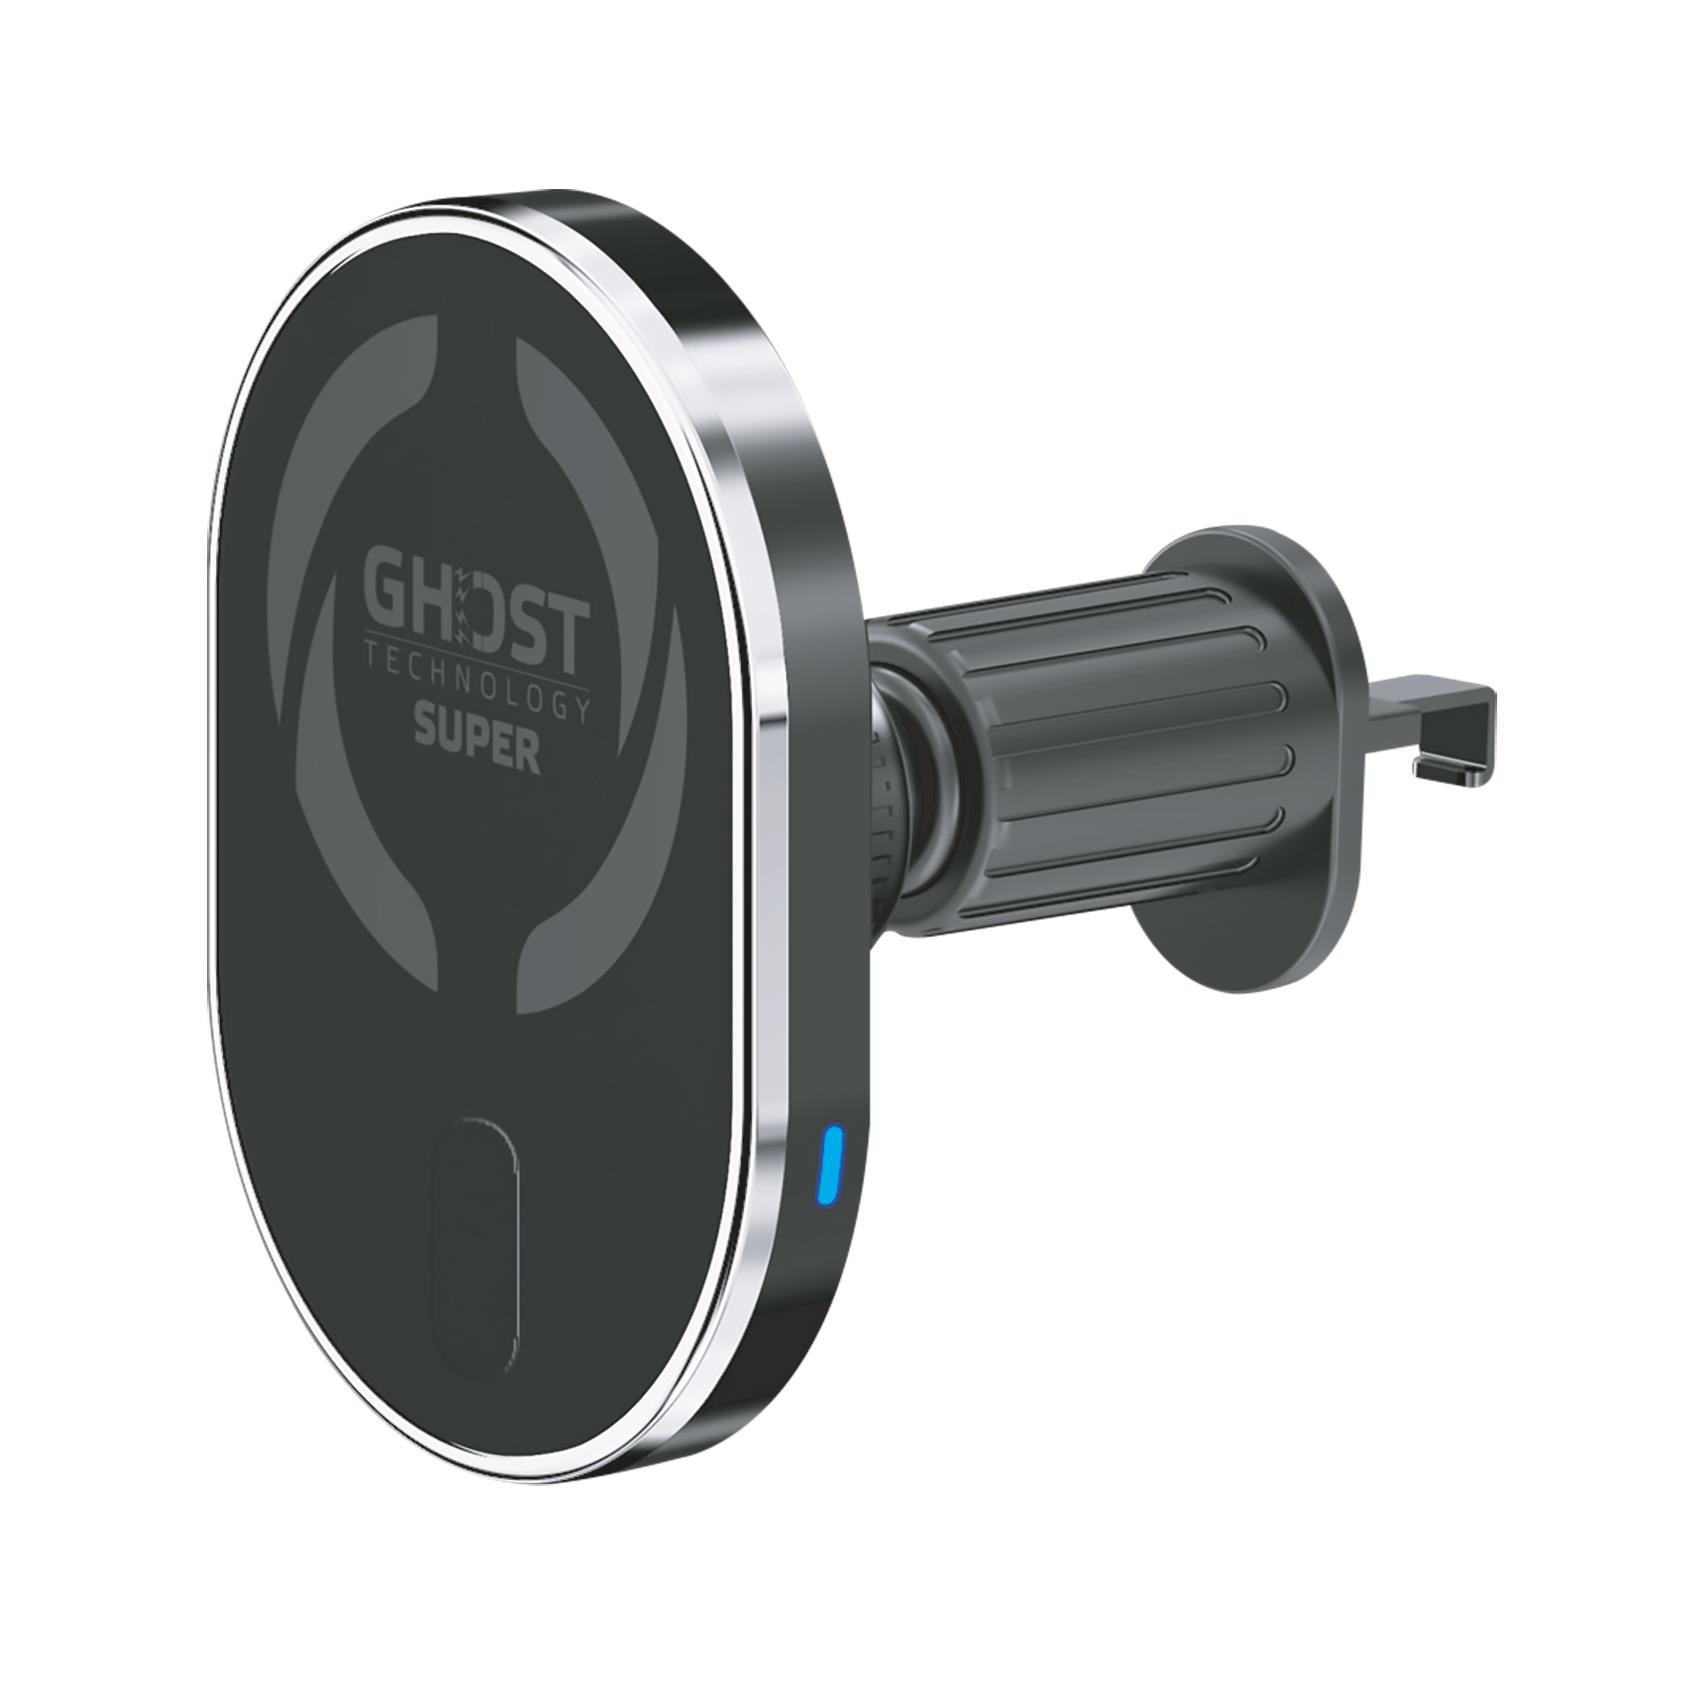 GHOSTSUPERMAGCH - MagSafe Car Holder With Wireless Charging